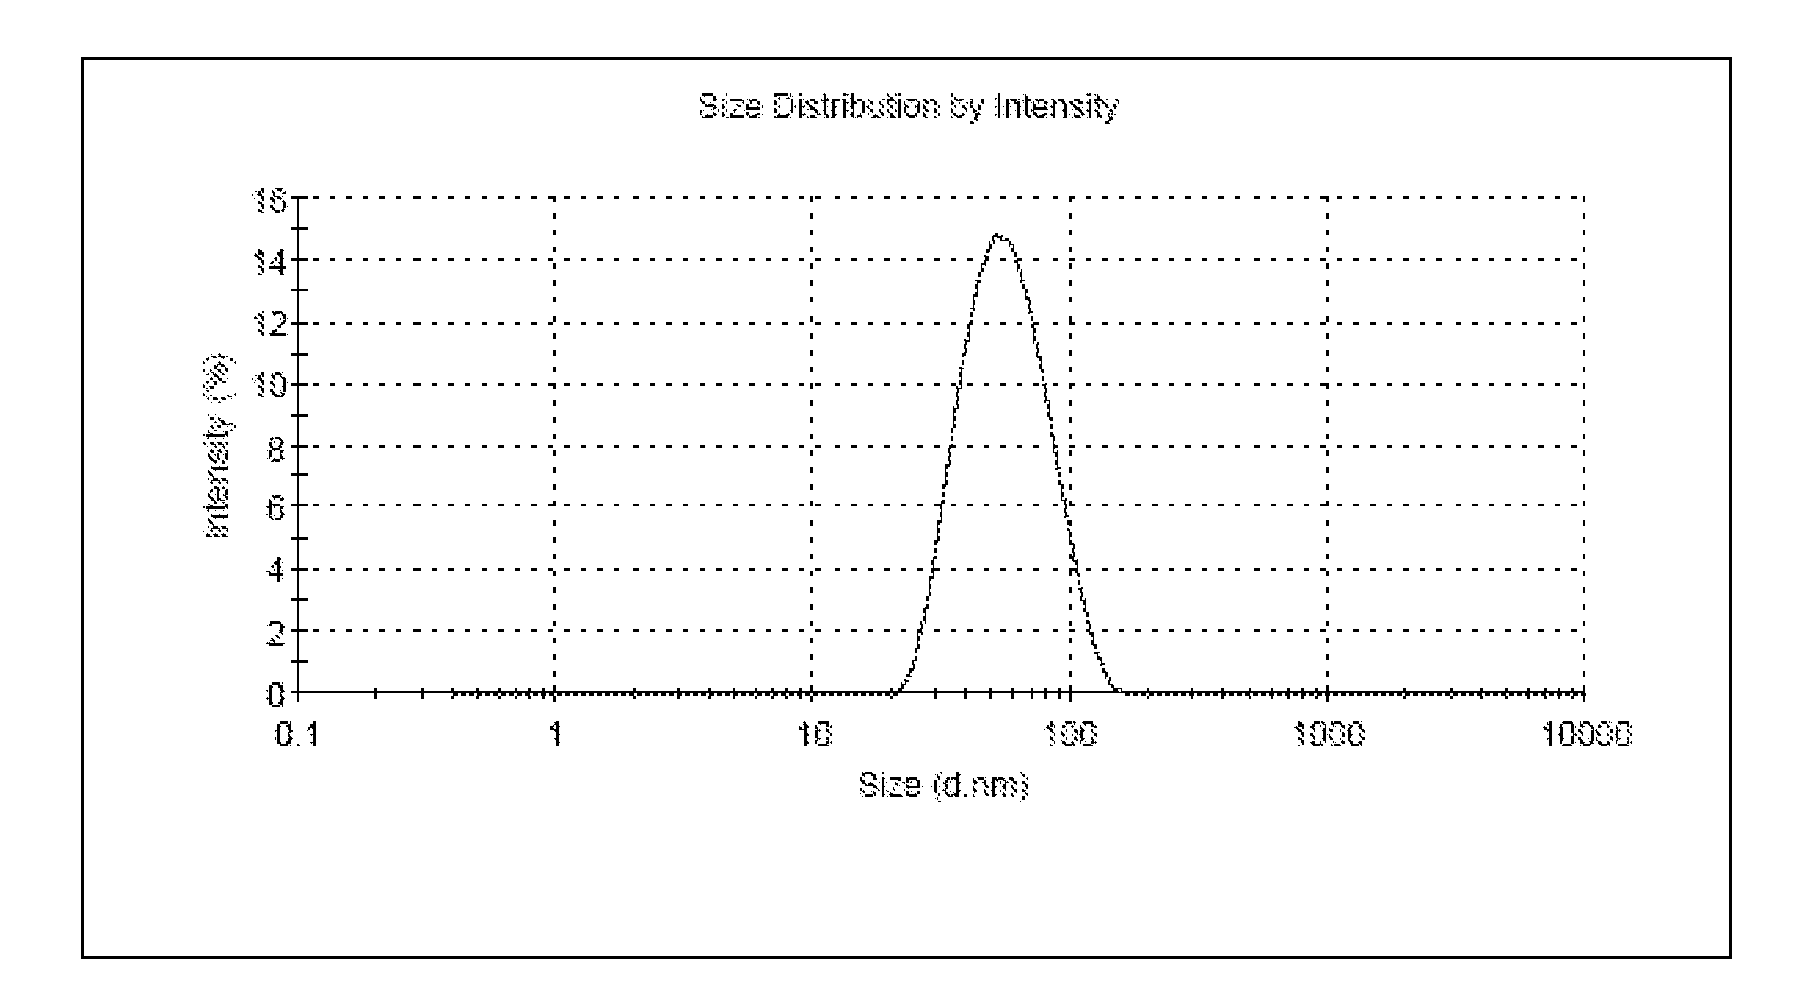 Nano-Emulsion Injection of Vinca Alkaloids and the Preparation Method Thereof